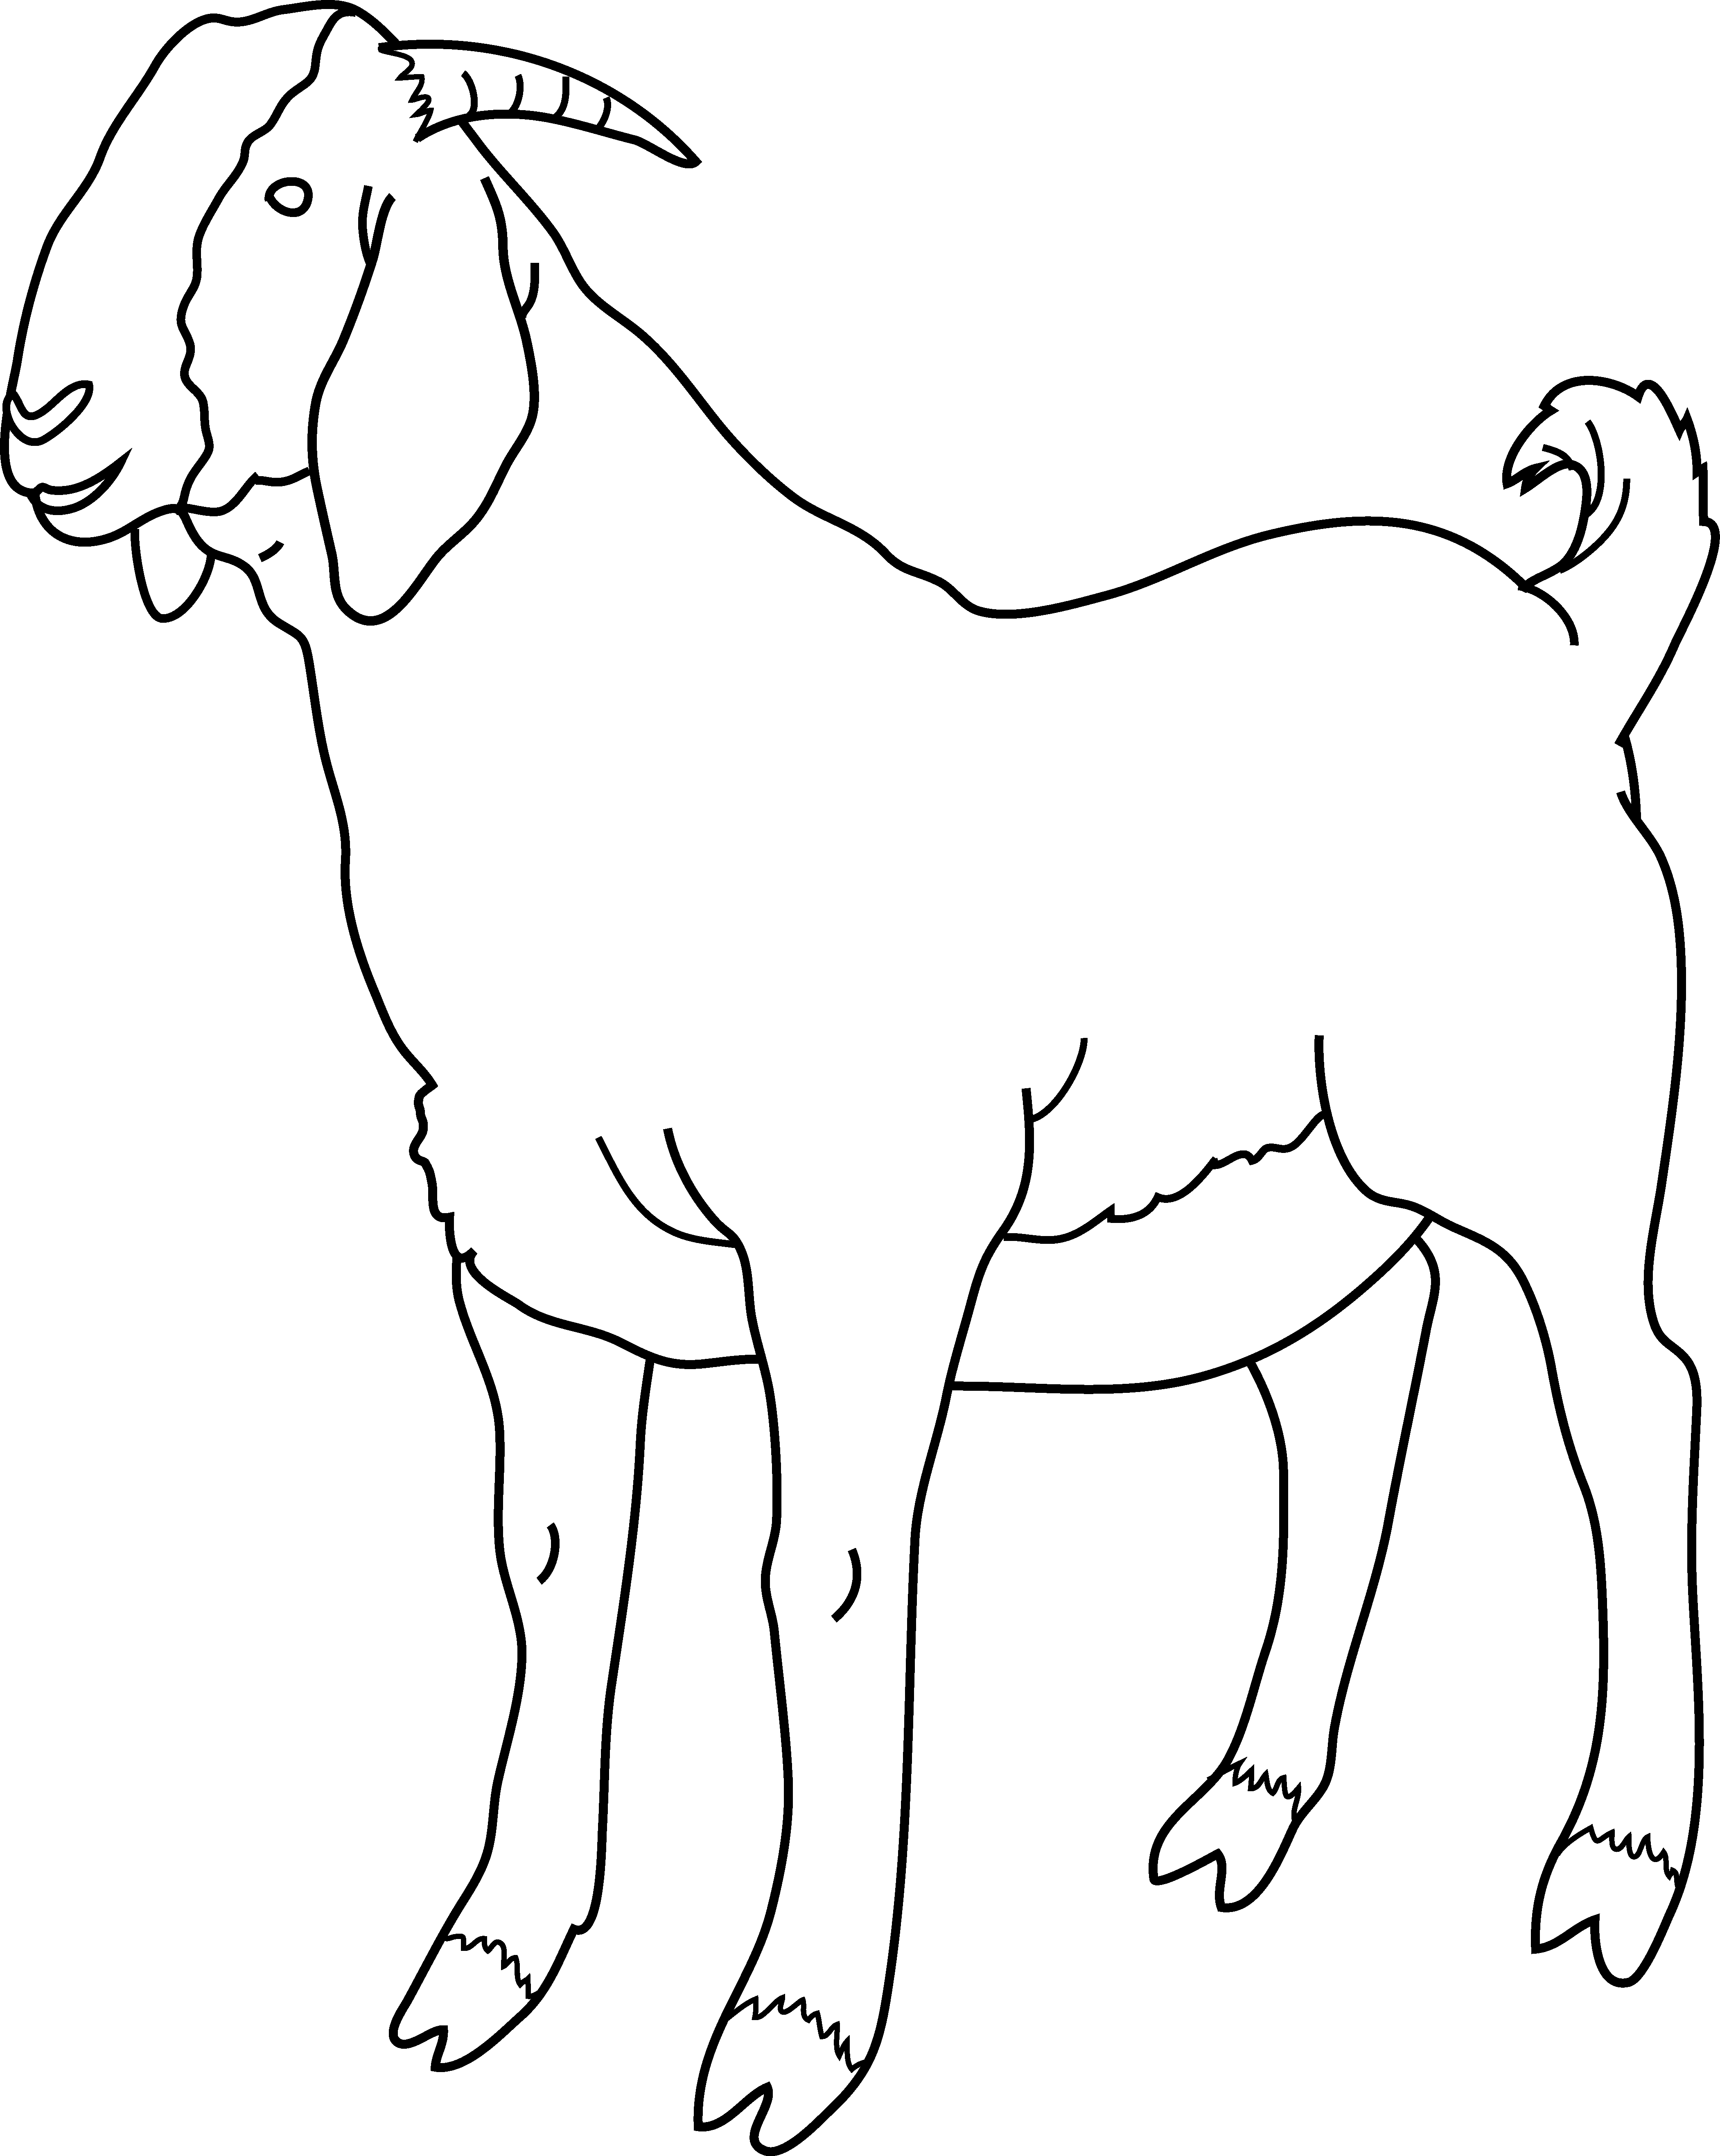 Images For > Goat Clipart